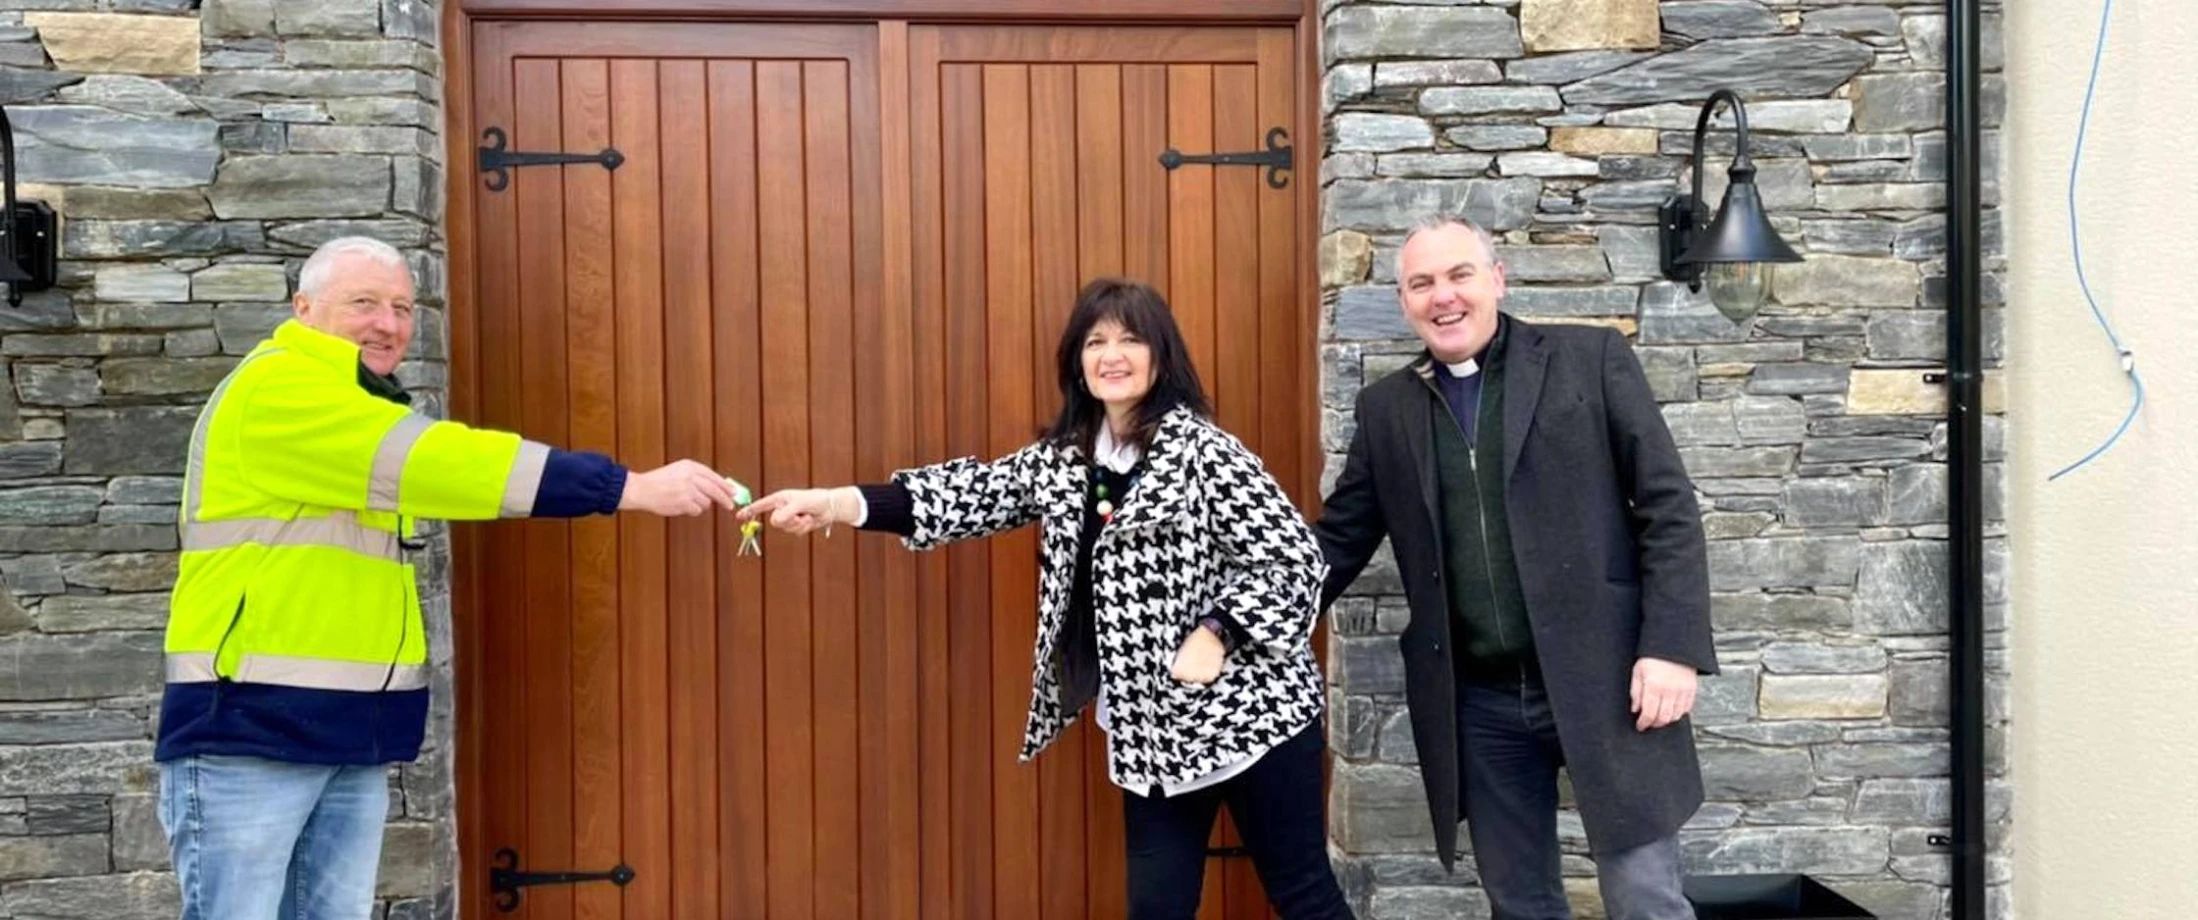 New rectory for Drumbo